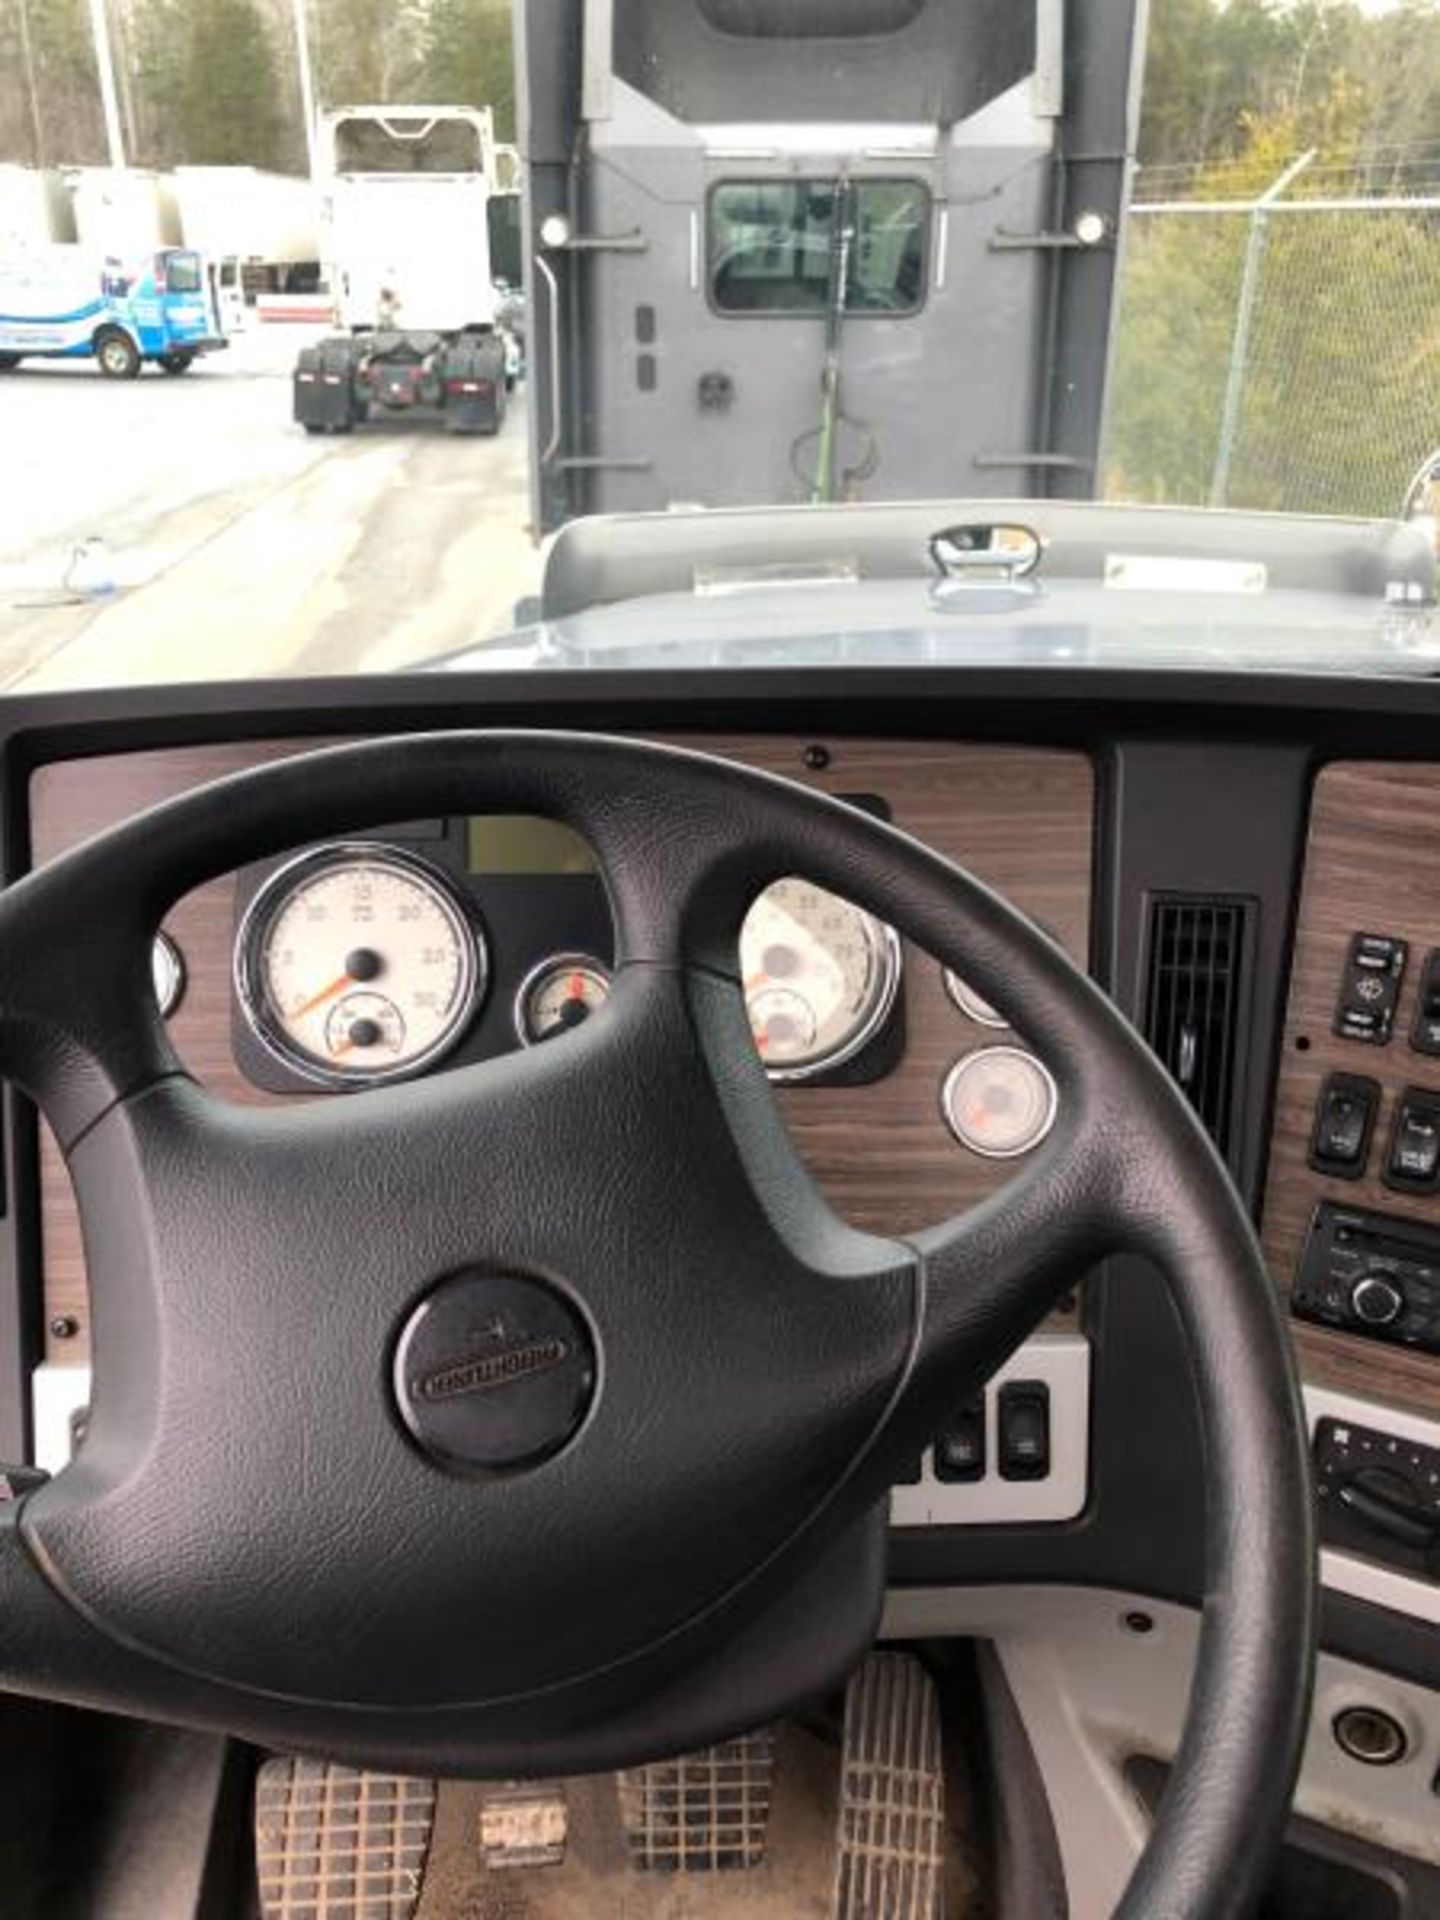 2017 Freightliner 122SD, 167,909 Miles - Image 4 of 28